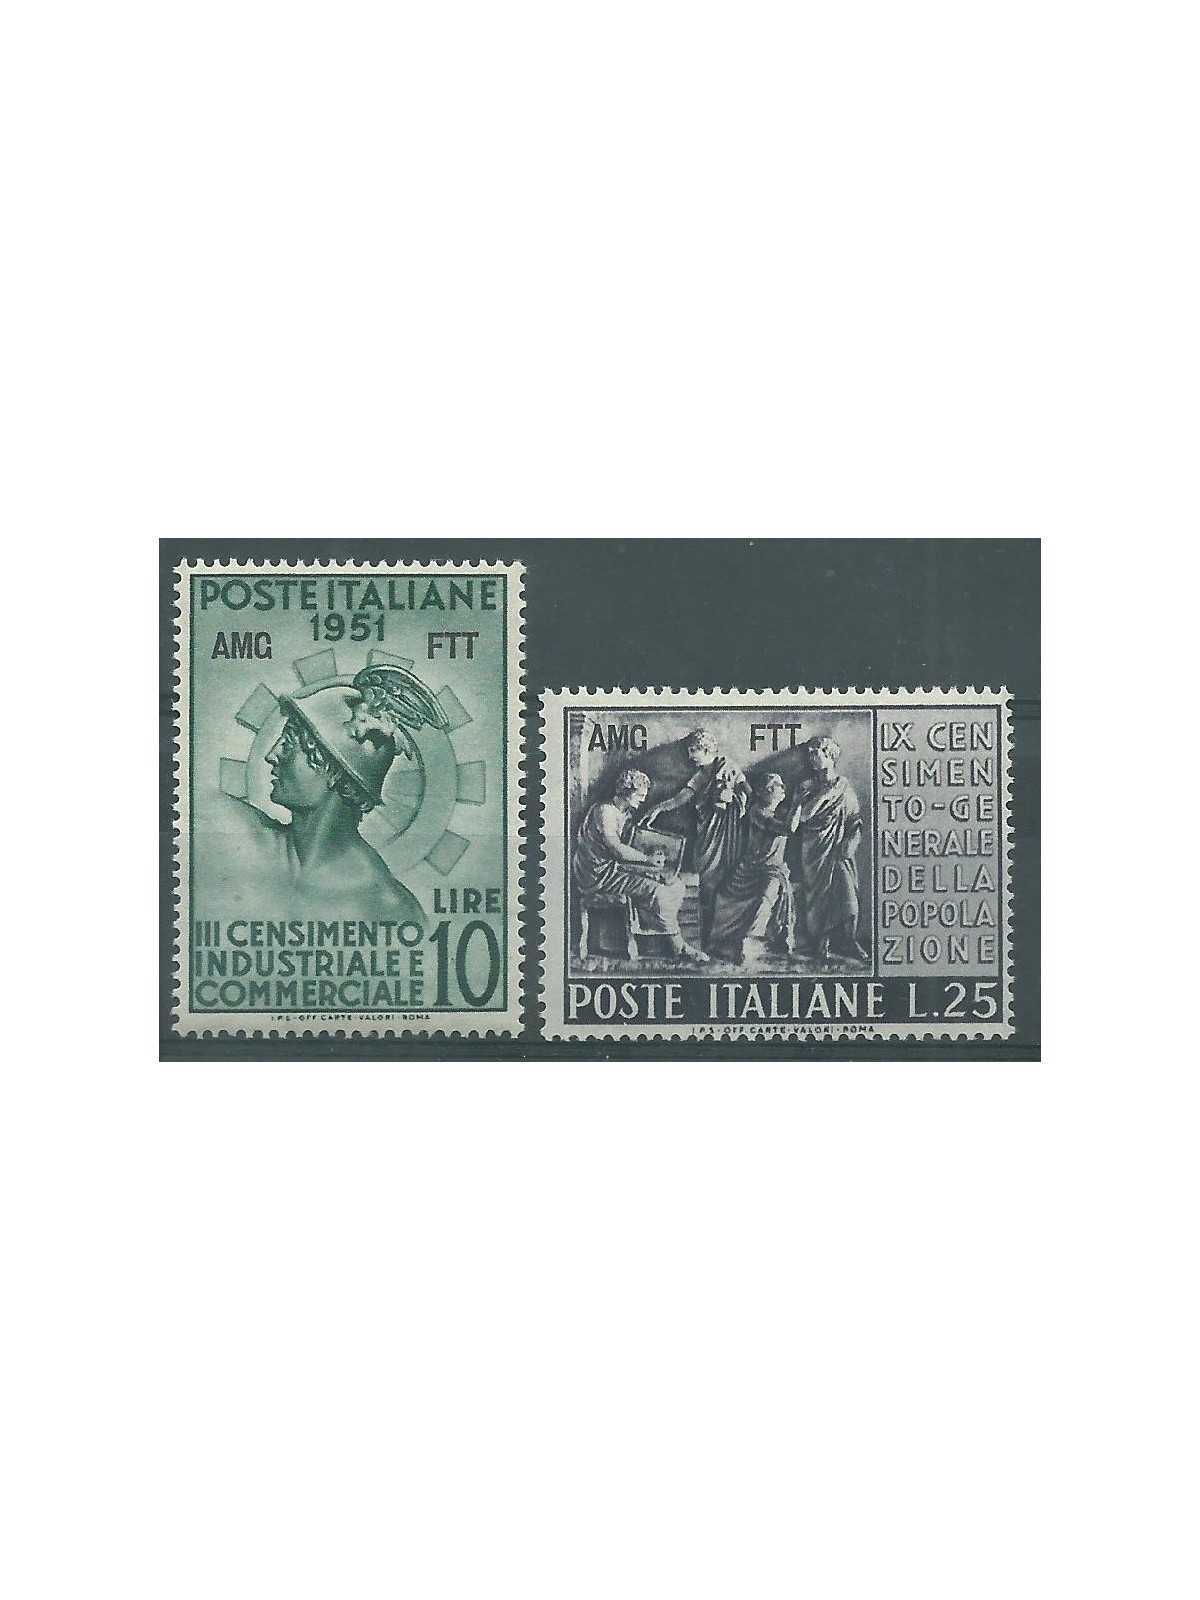 1951 TRIESTE A AMG-FTT CENSIMENTO INDUSTRIALE 2 VAL MNH MF23254